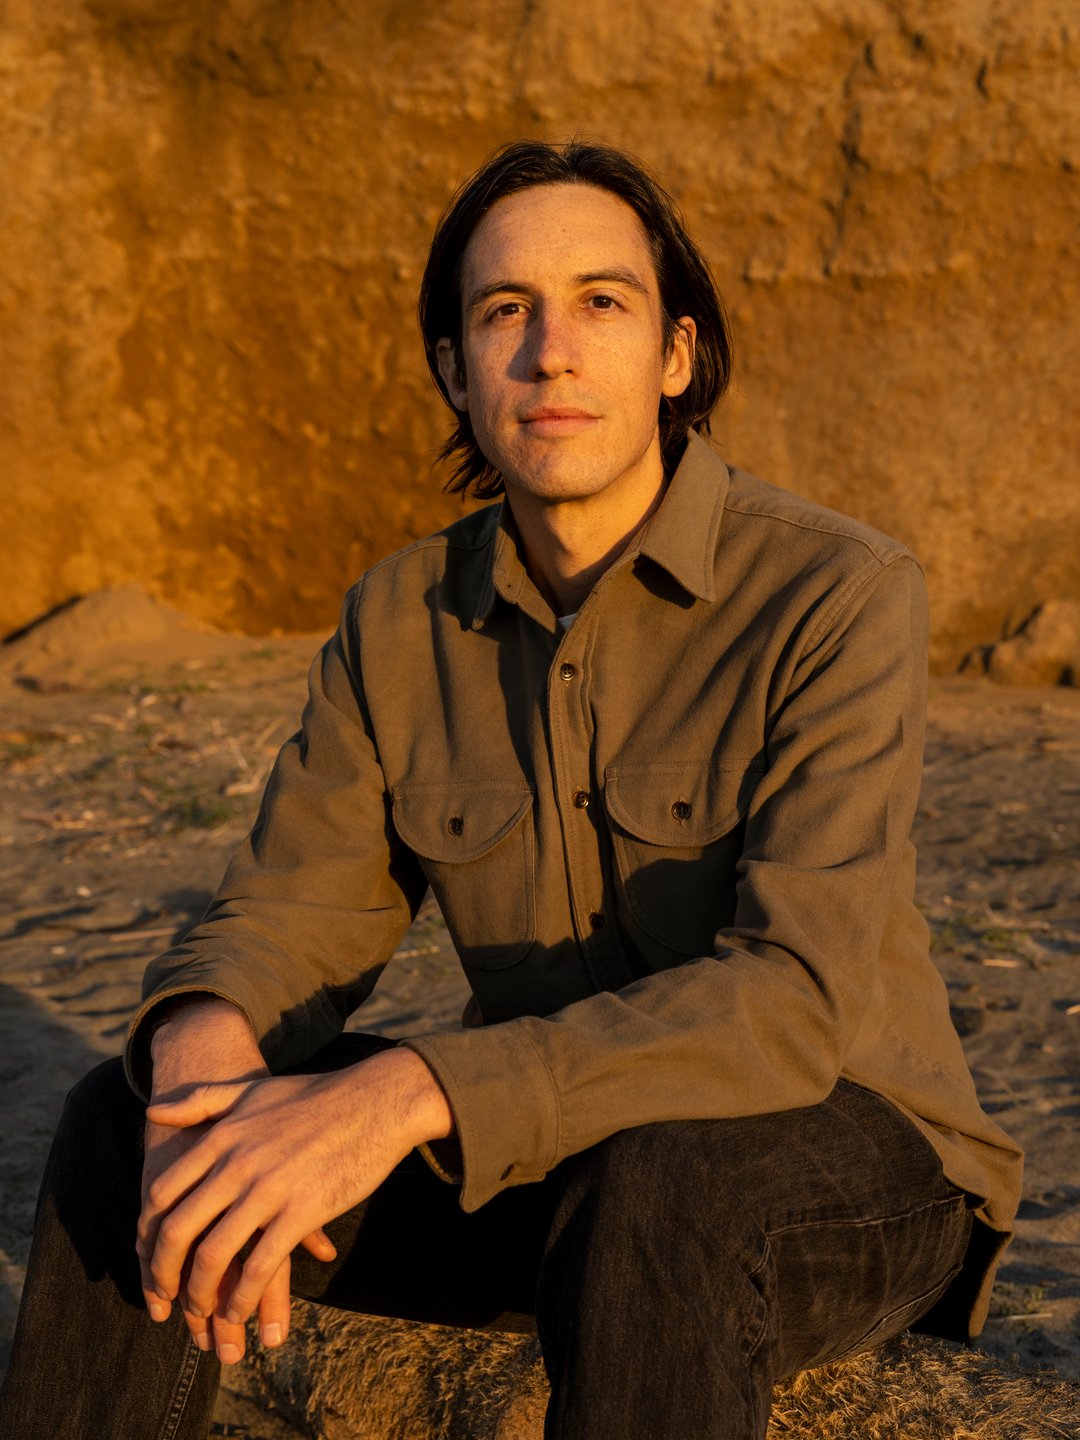 In this photograph, Josh is sitting on a beach. The light is yellow and warm, as if the photo was taken during golden hour.